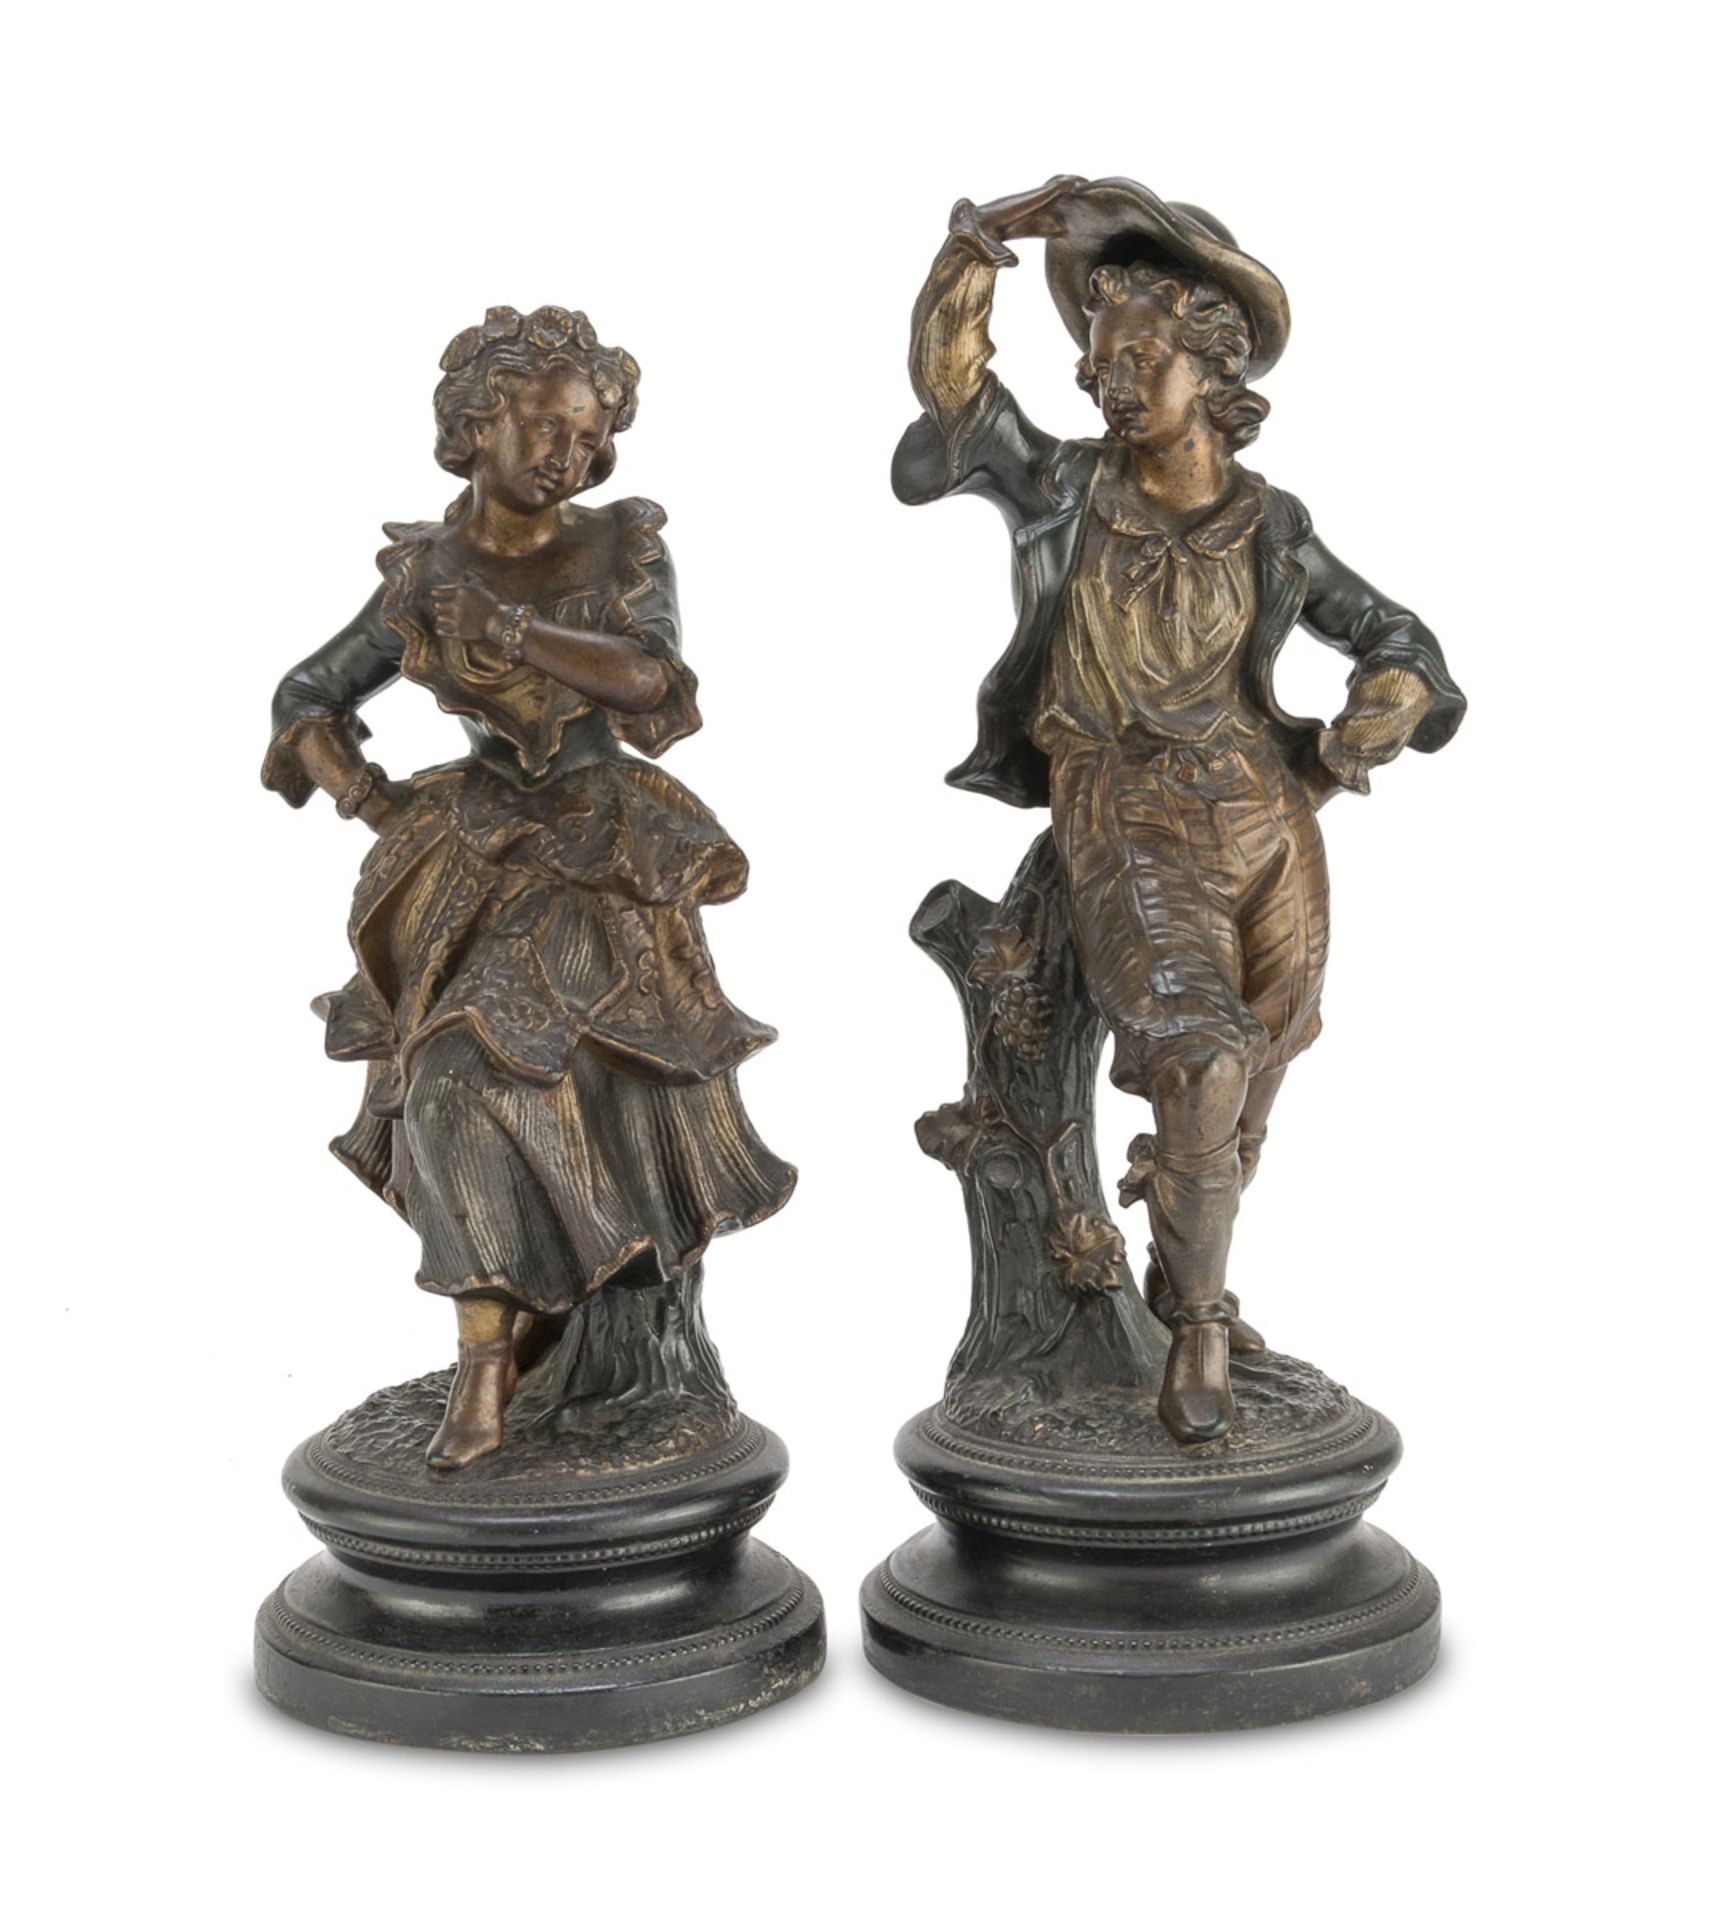 A PAIR OF SCULPTURES IN EARTHENWARE - LATE 19TH CENTURY